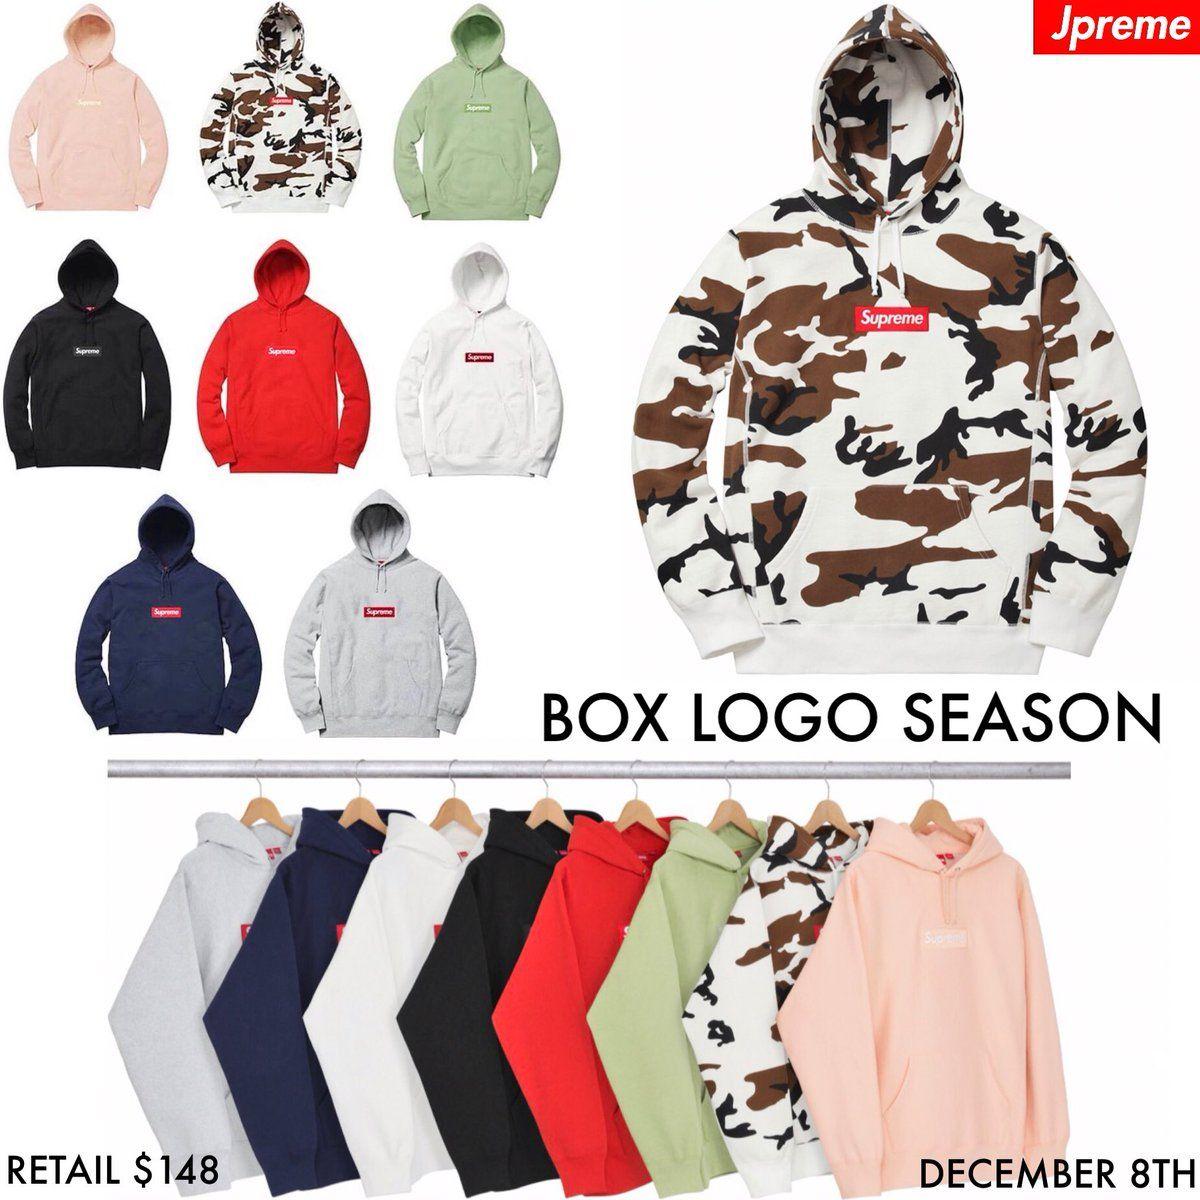 A Single White On Red Box Logo - J Box Logo Hoody Release Dec 8th Unless Pushed